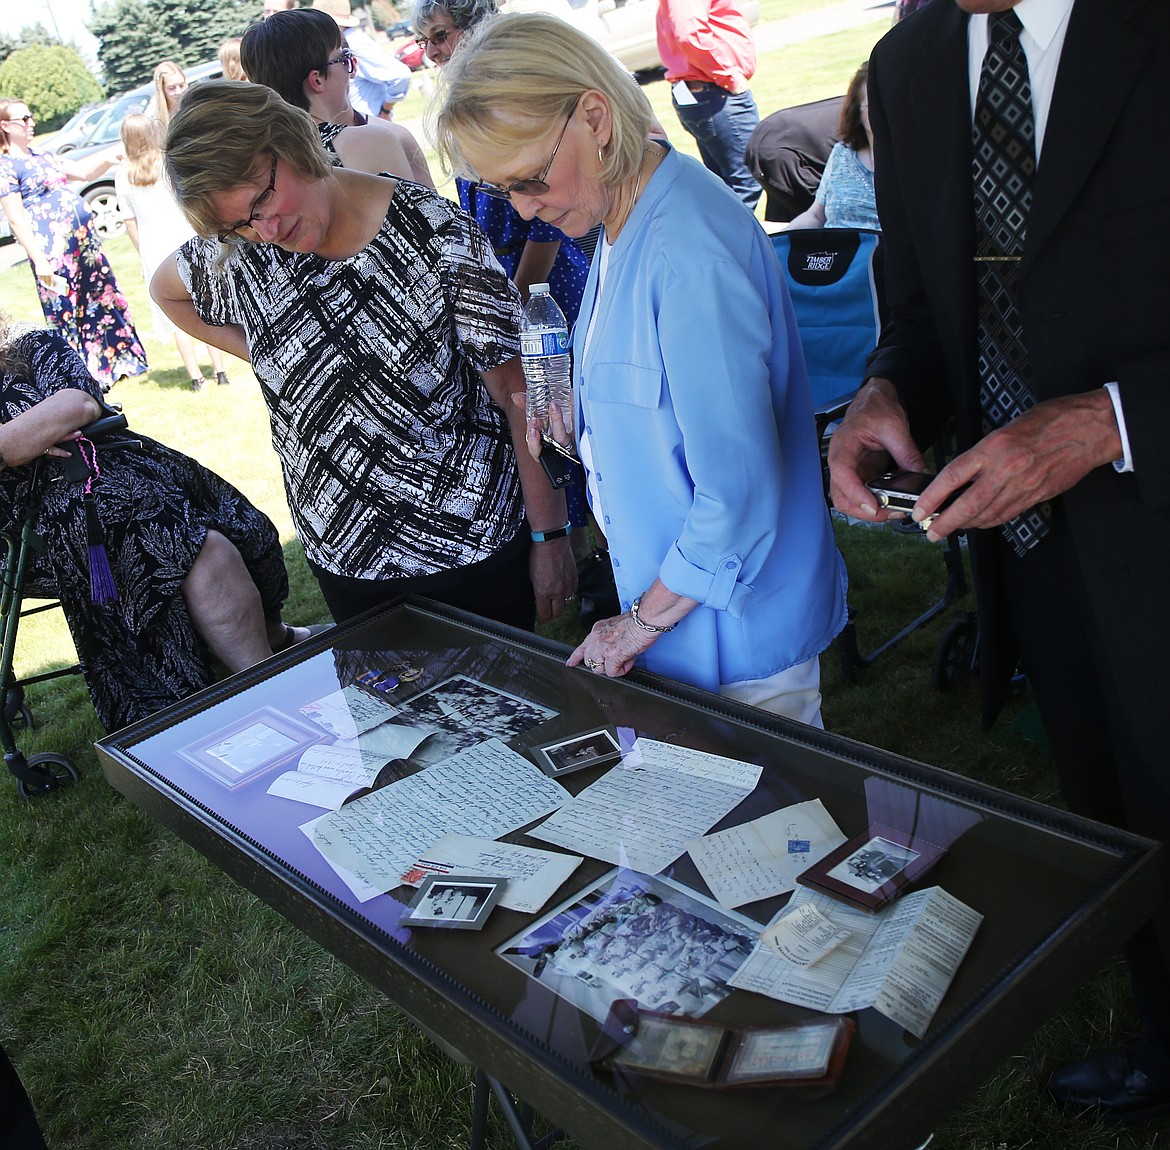 Linda Georgeson, left, and Linda Vercoe view old letters, photos and other momentos Tuesday at Charles Daman's Ceremony at Coeur d'Alene Memorial Gardens. (LOREN BENOIT/Press)